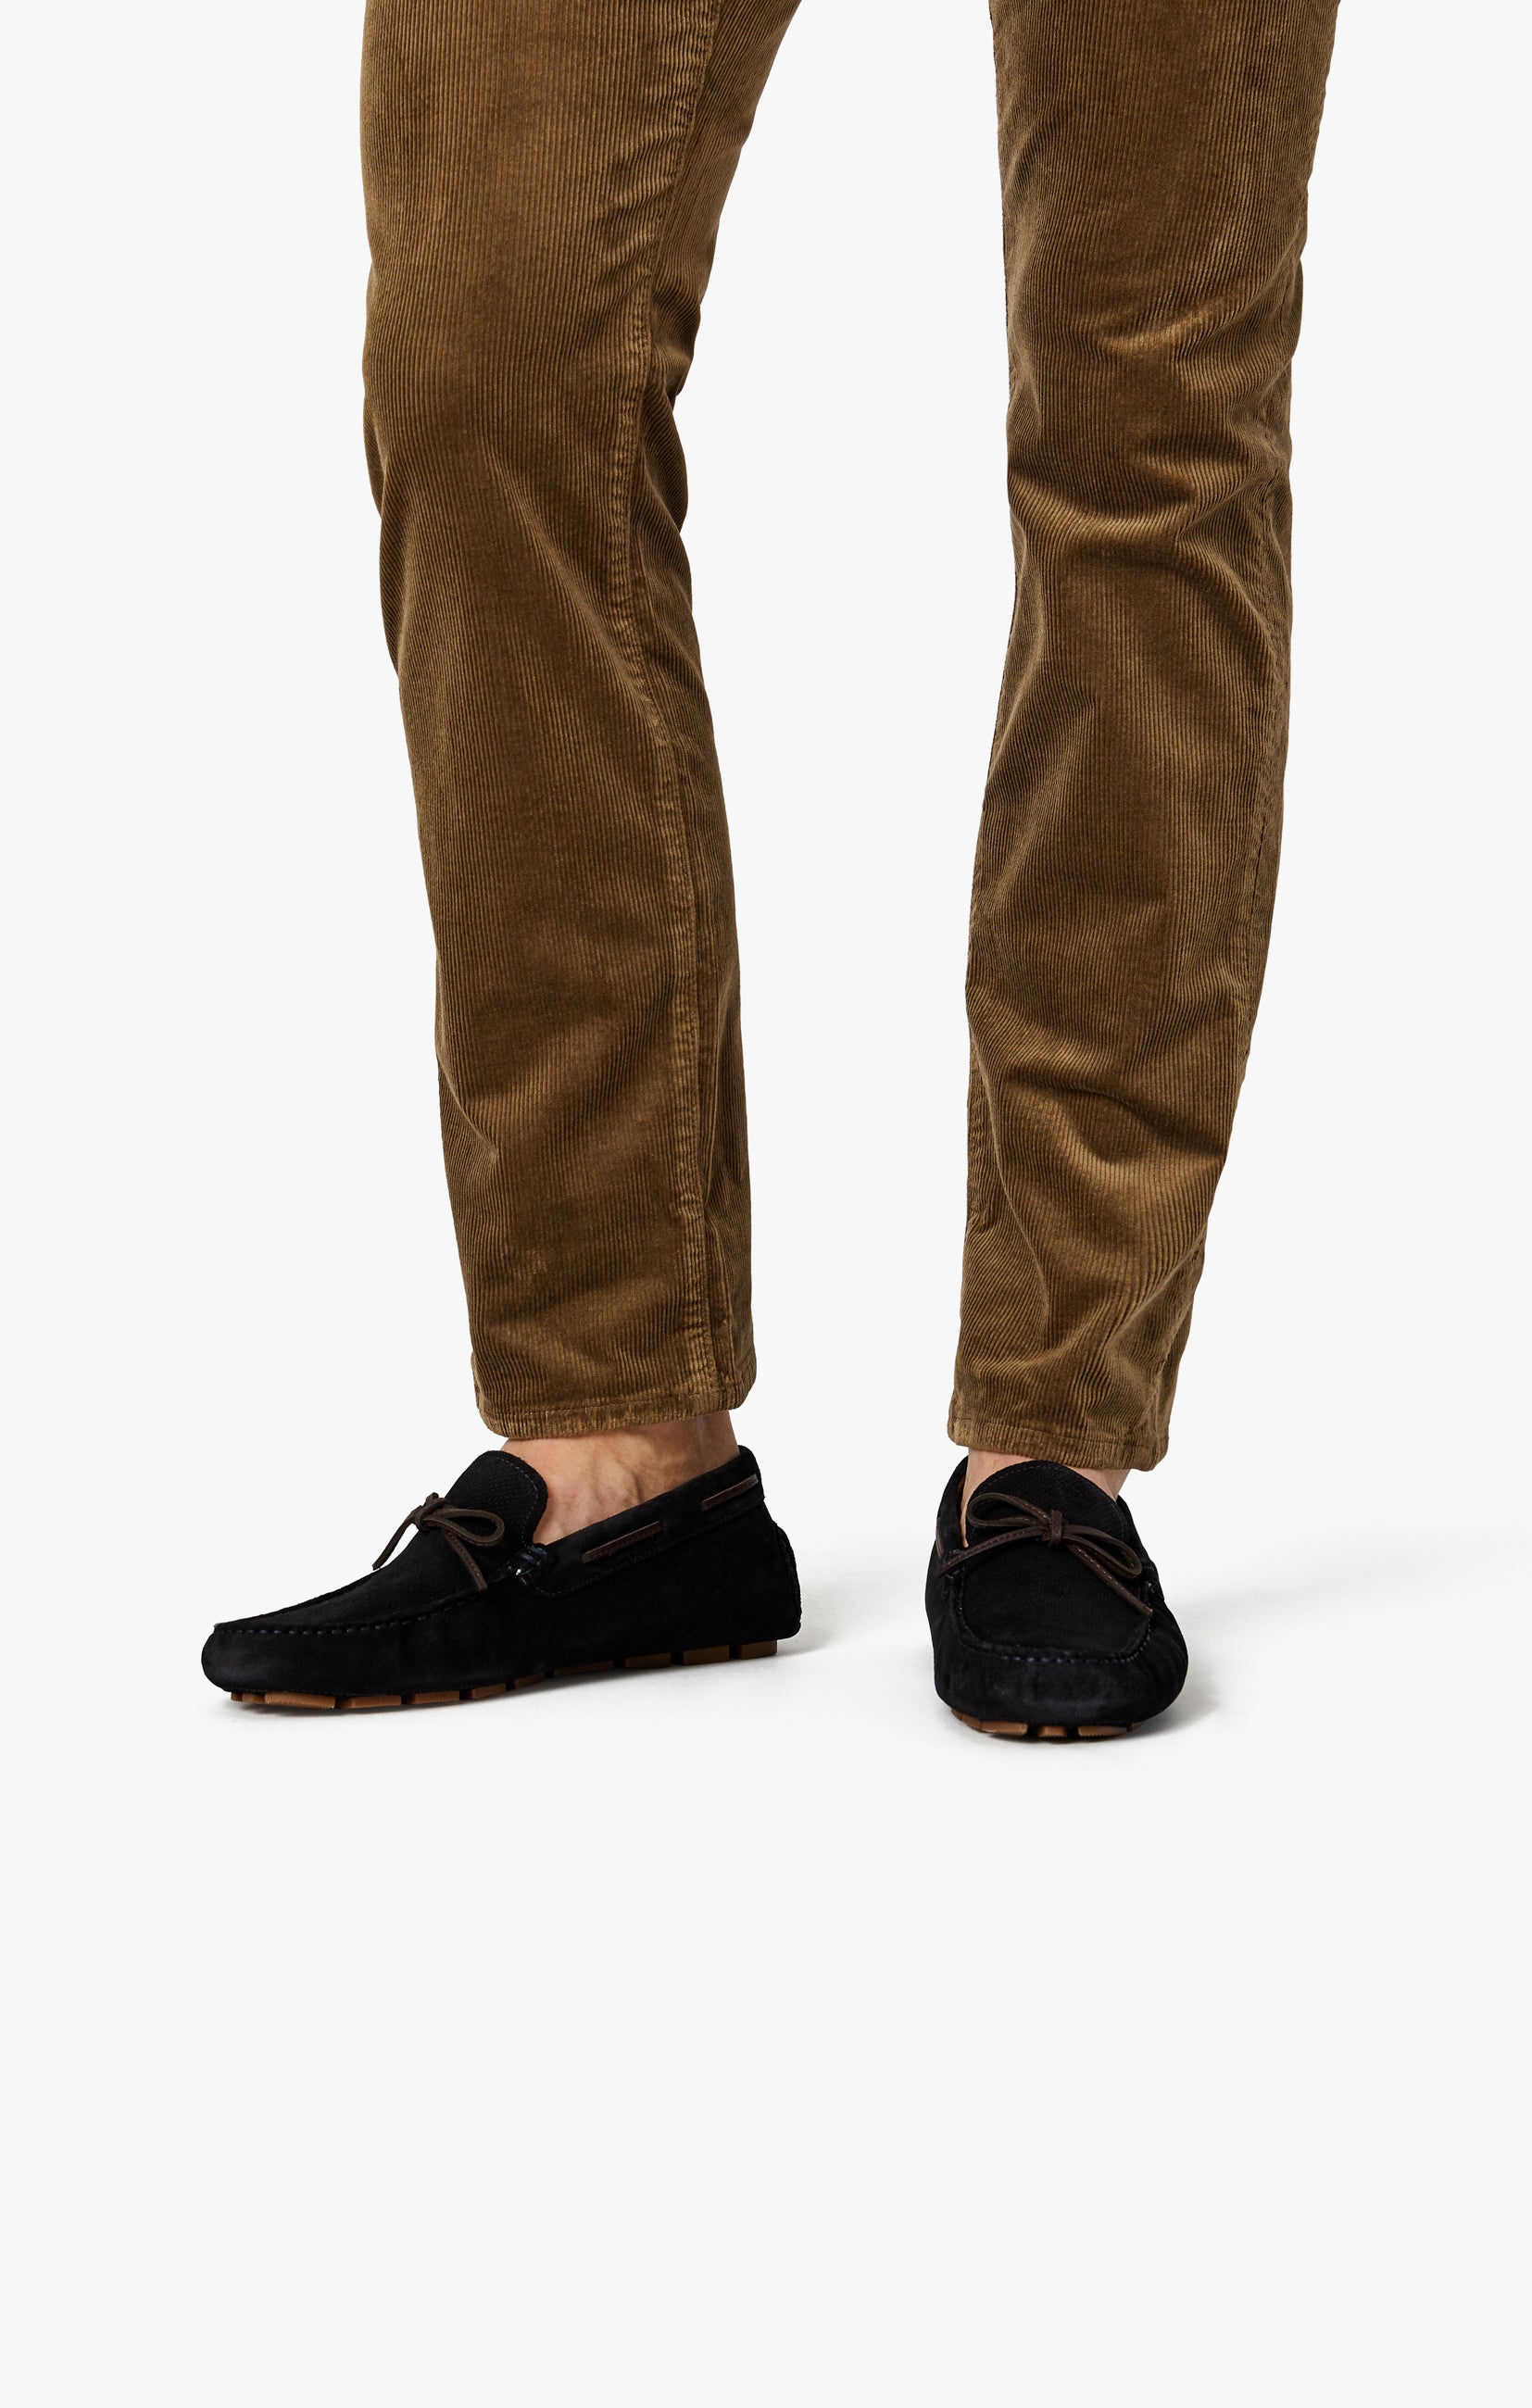 Courage Straight Leg Pants In Tobacco Cord Image 9